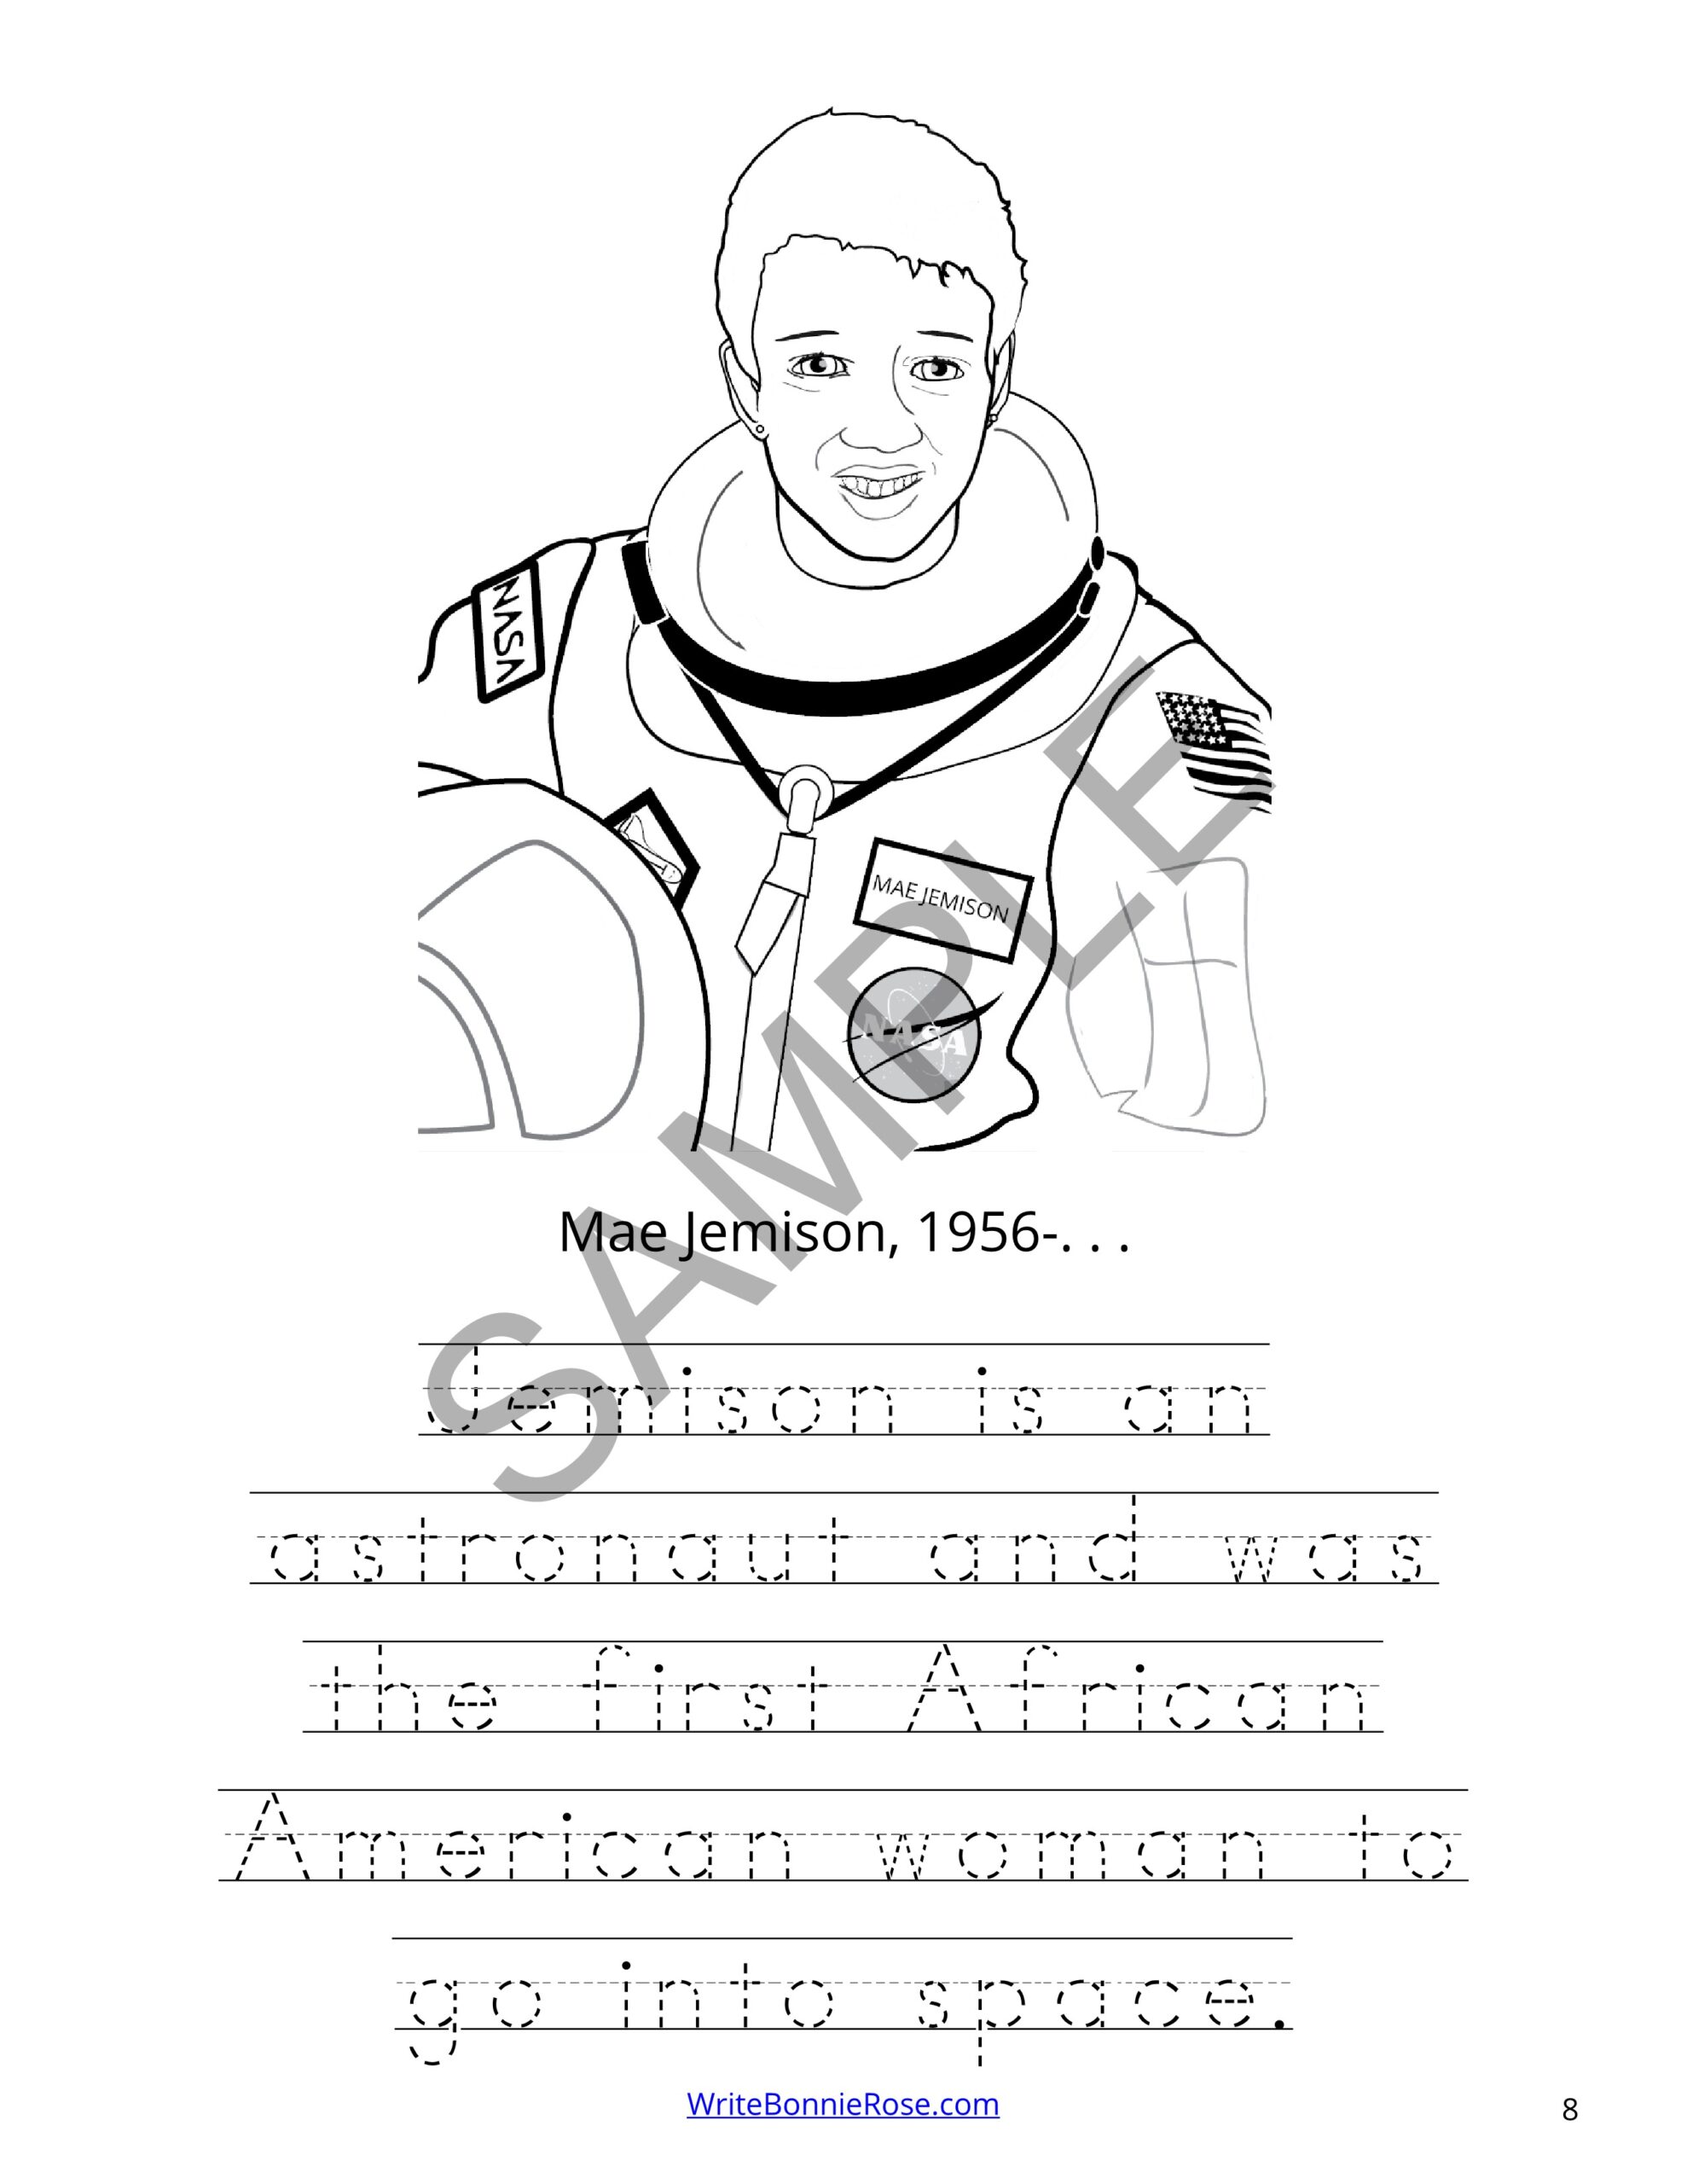 Famous americans of the s coloring book